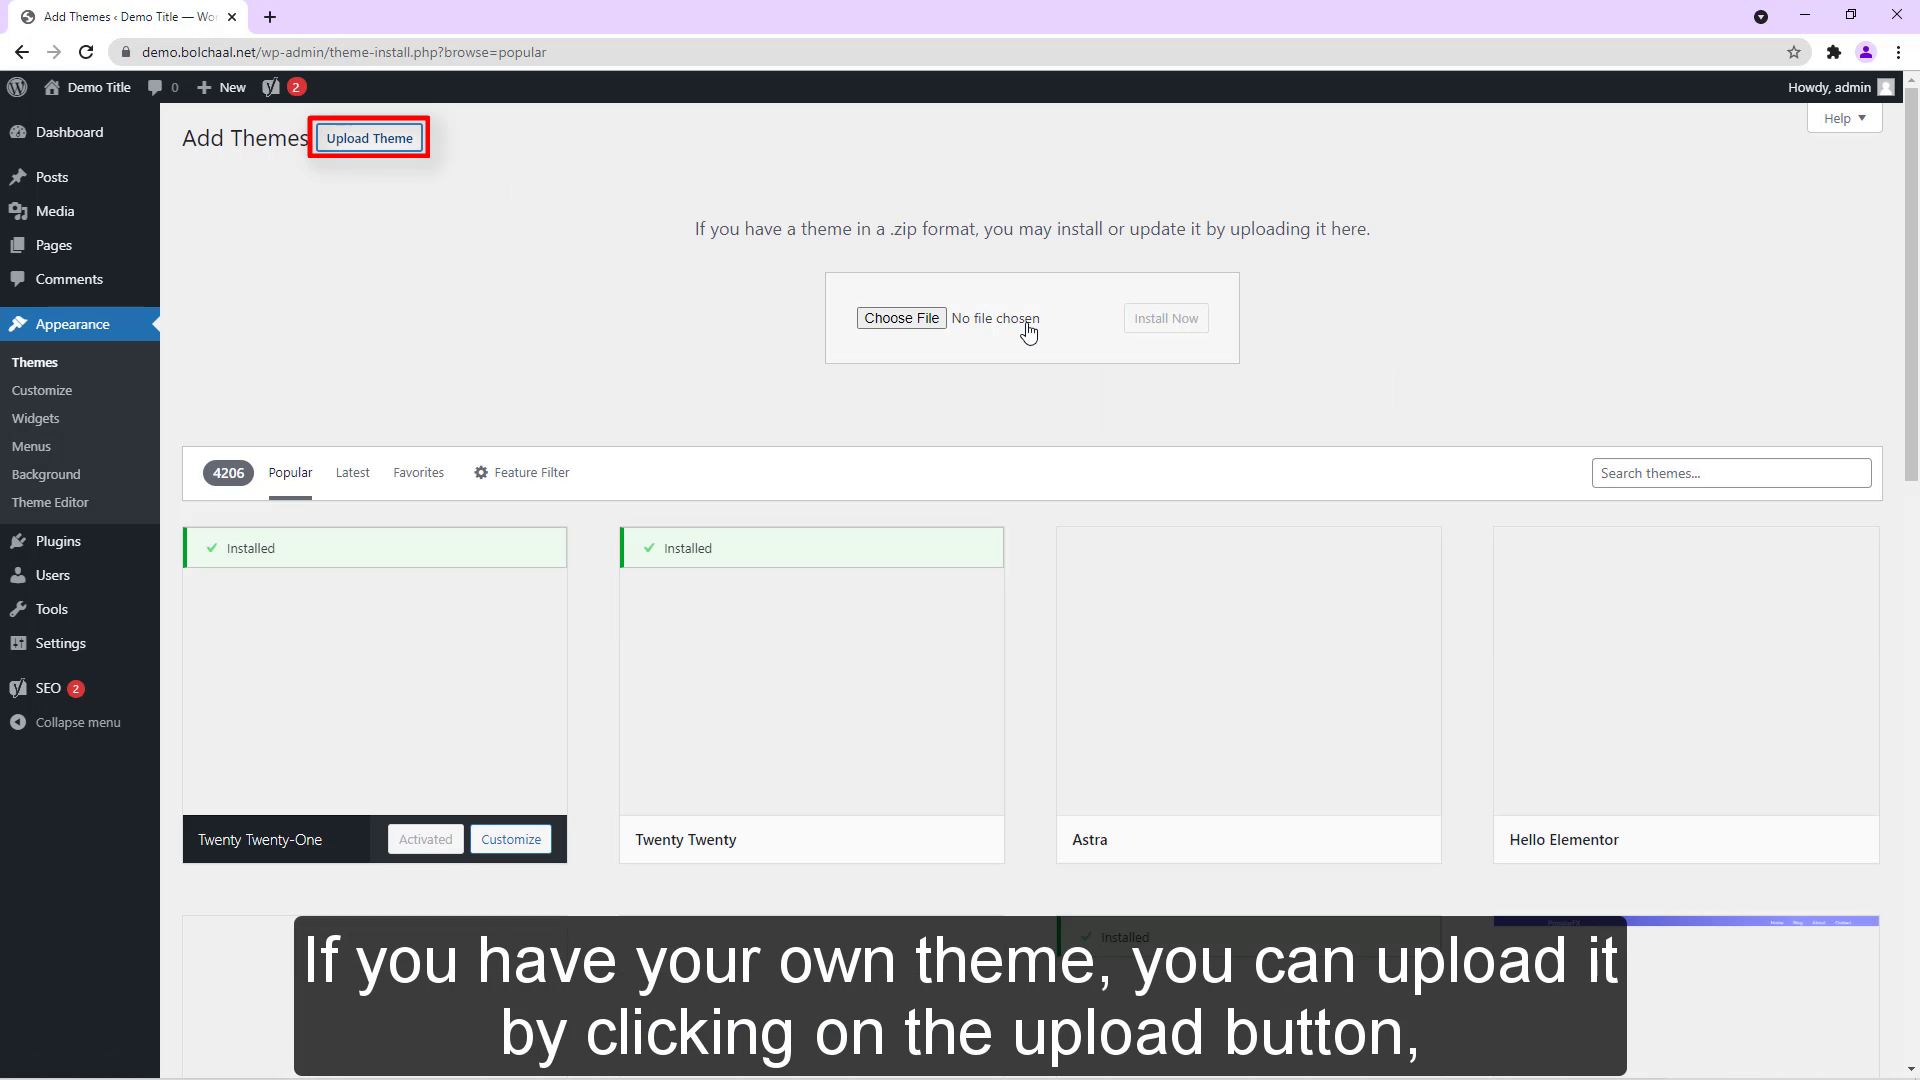 If you have your own theme, you can upload it